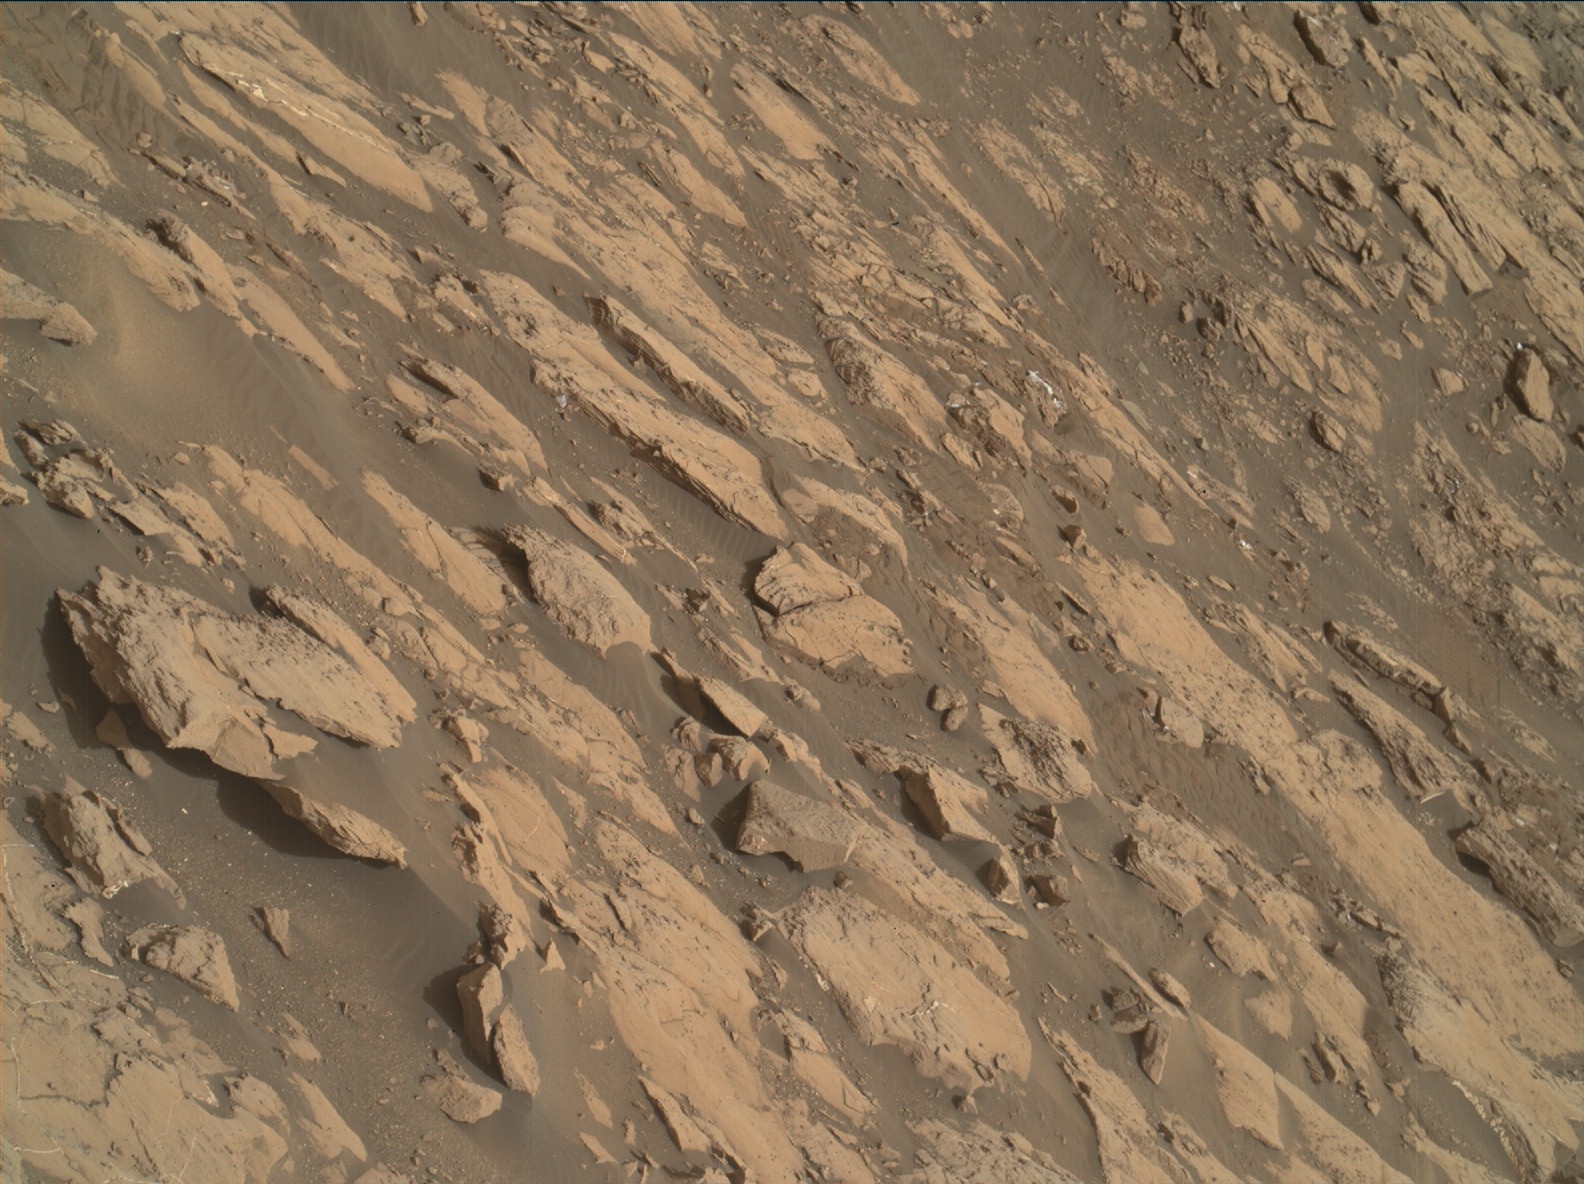 Nasa's Mars rover Curiosity acquired this image using its Mars Hand Lens Imager (MAHLI) on Sol 1463